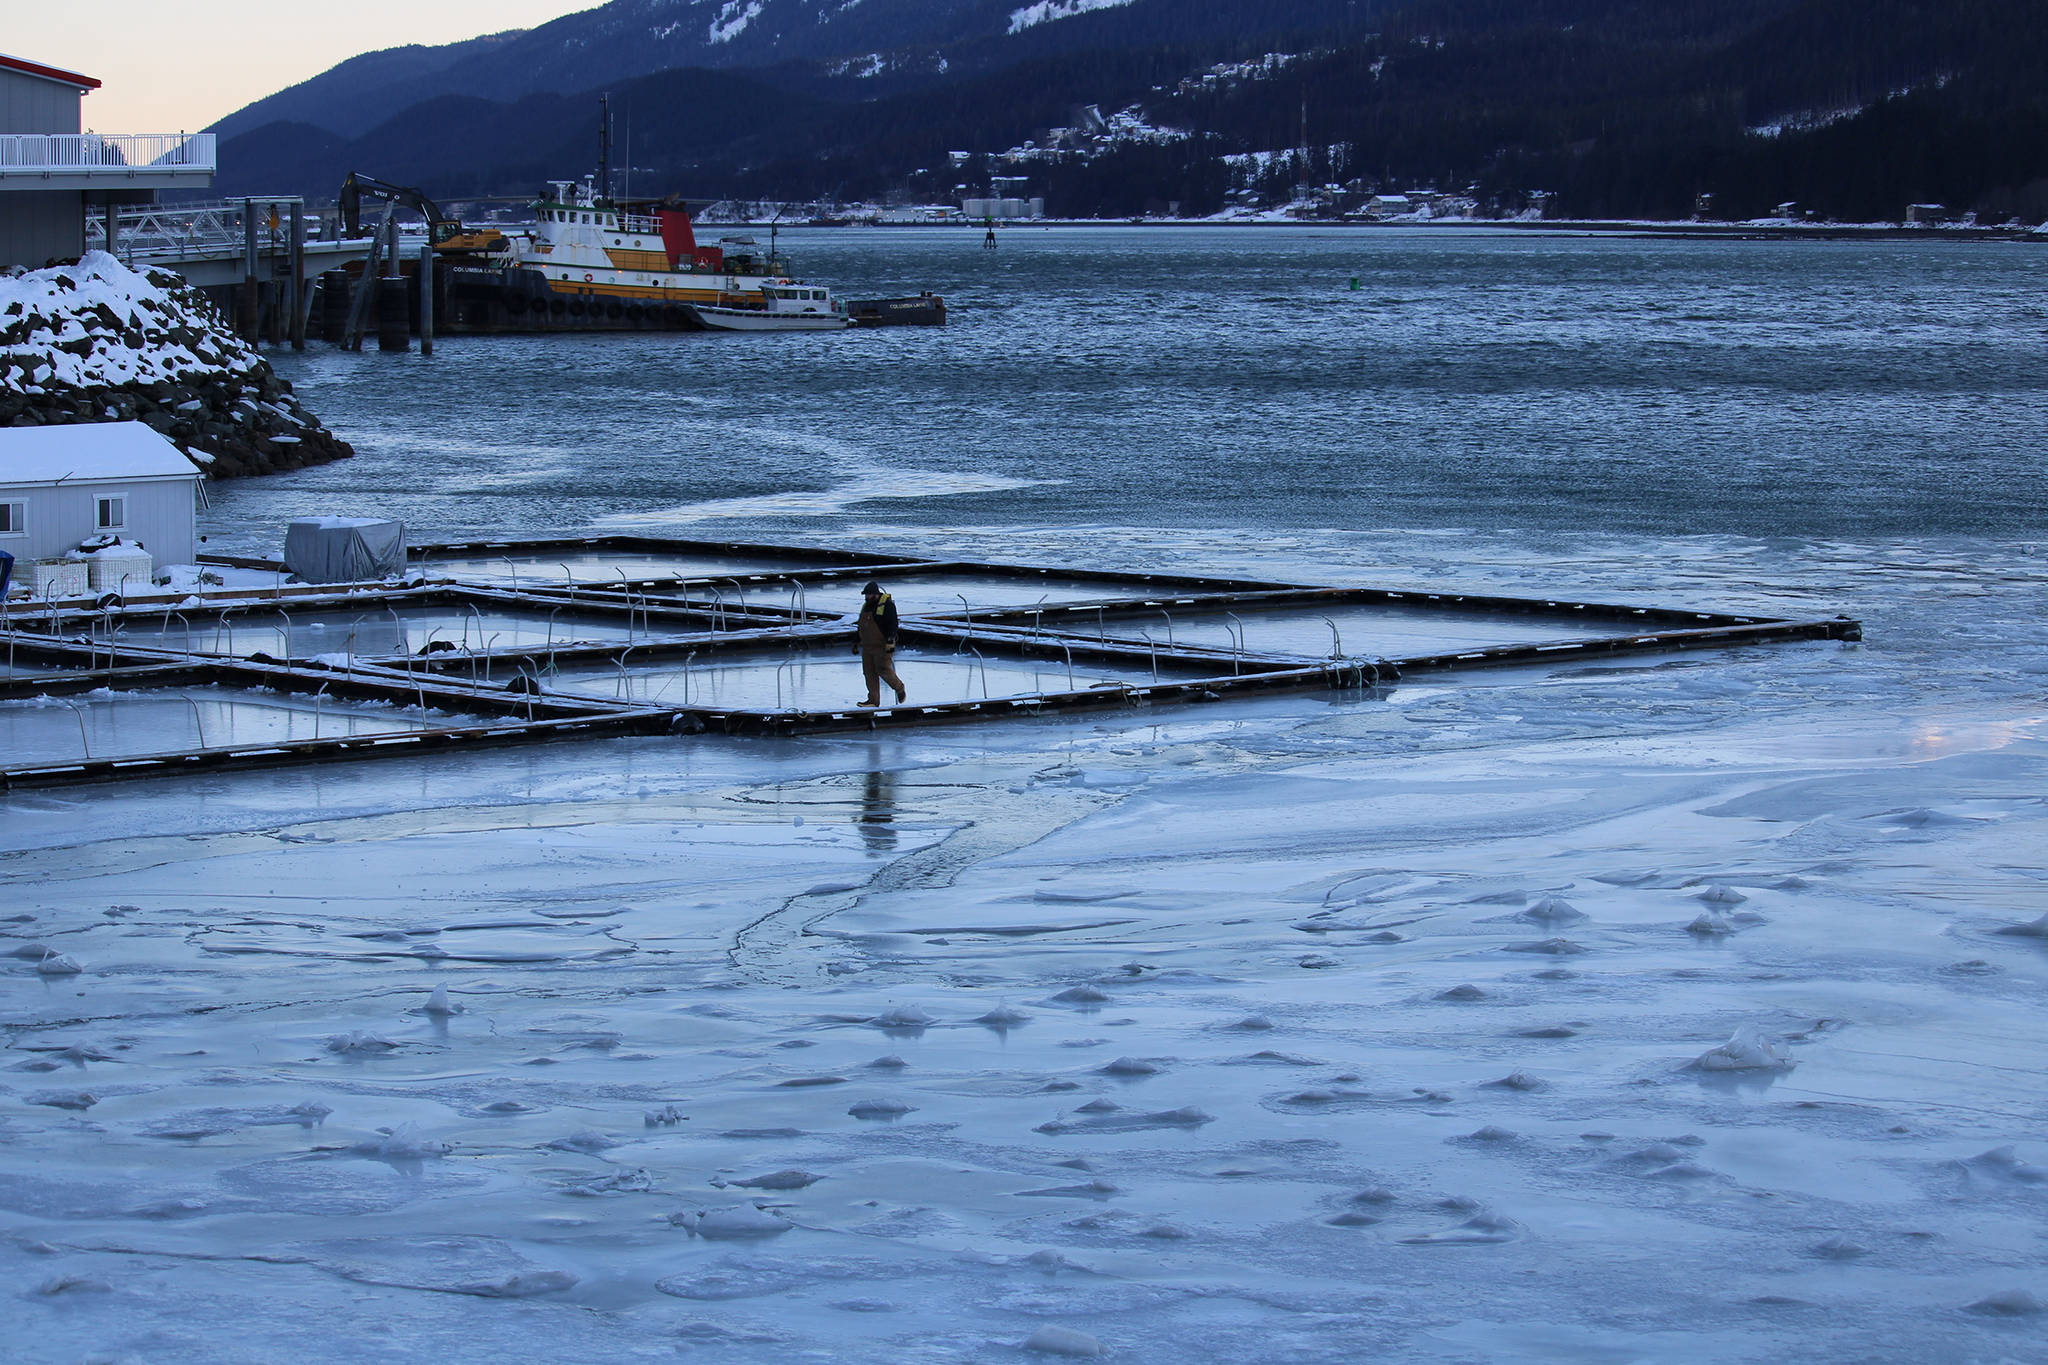 A worker walks on the pier near Douglas Island Pink and Chum Inc's Macaulay Salmon Hatchery Thursday afternoon. Ice has formed on the Gastineau Channel amid frigid temperatures brought on by a high-pressure ridge over mainland Alaska and Western Canada. (Dana Zigmund / Juneau Empire)